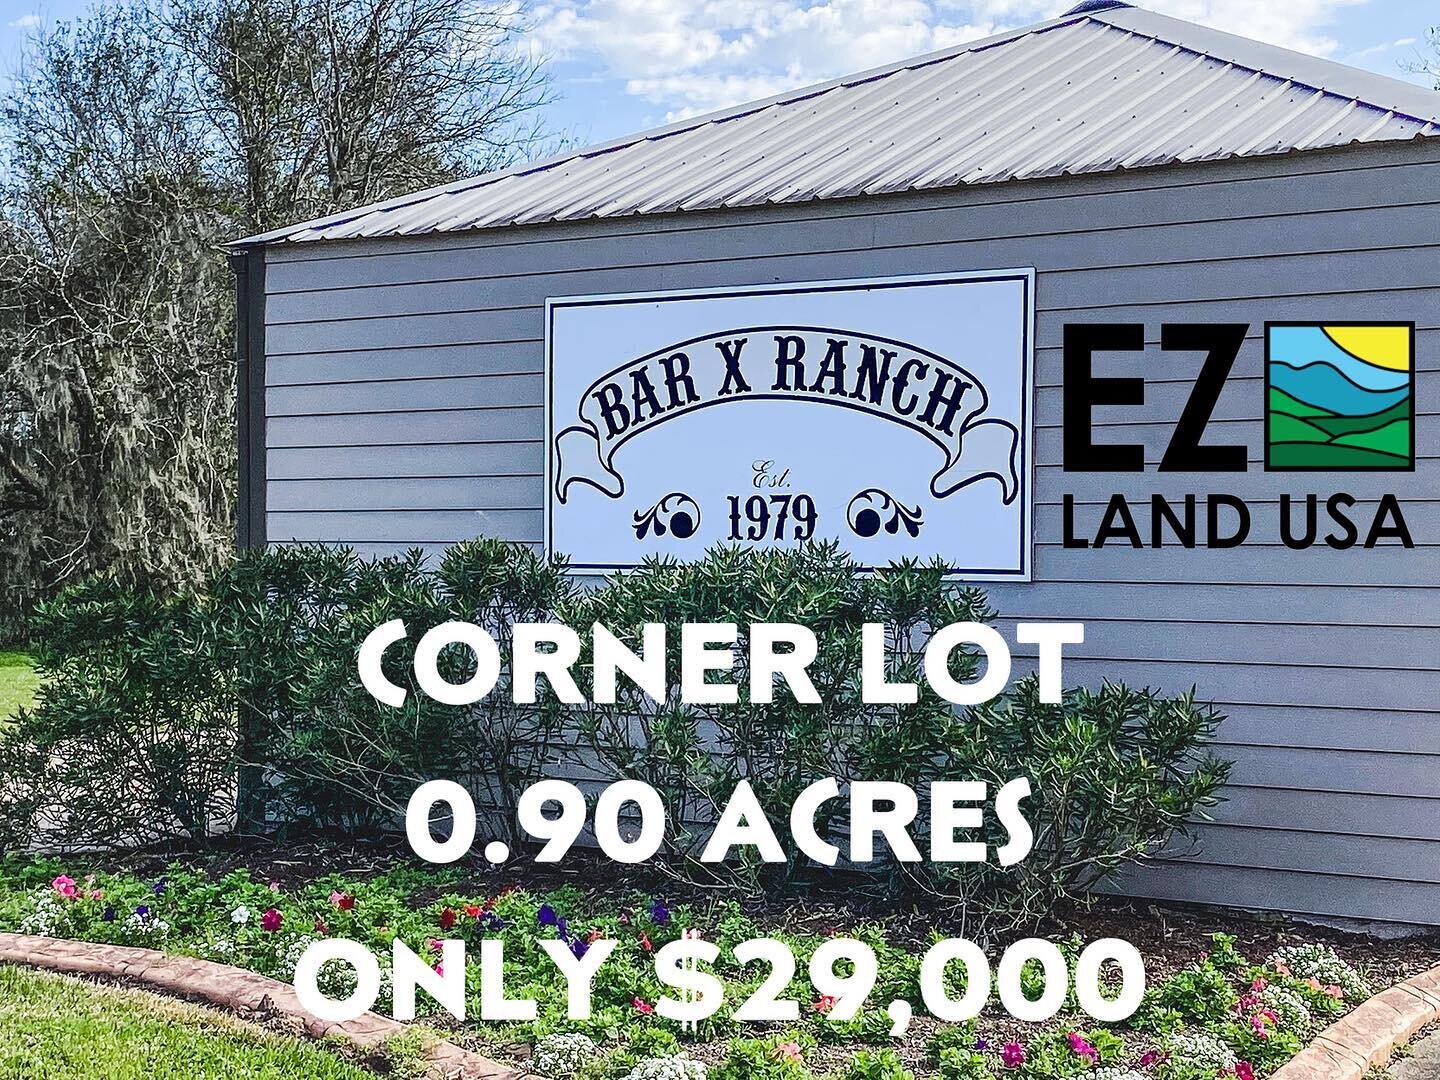 ANOTHER HOT LOT 🚨🔥🔥🔥🔥🔥 
Beautiful Corner Lot 

Details 👇🏽 

501 Wagon Wheel Trail, Angleton TX 77515
Price $29,000
Vacant lot (39,204 )
(.90 Acre)
utilities: Light available. Need
Septic &amp; Water well
county: Brazoria
Subdivision: Bar X Ra